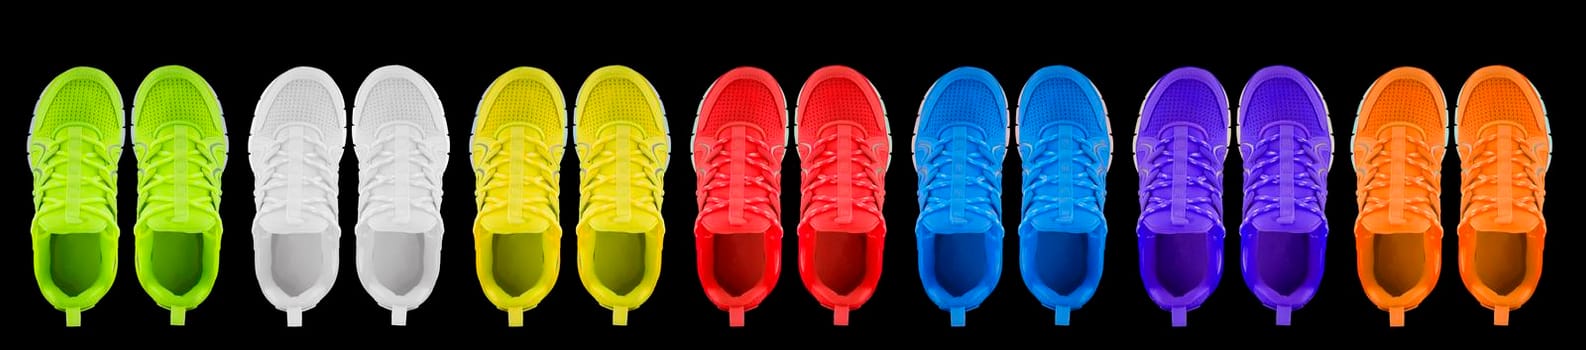 Sneakers in different colors on a black background. Seamless texture of multi-colored shoes.